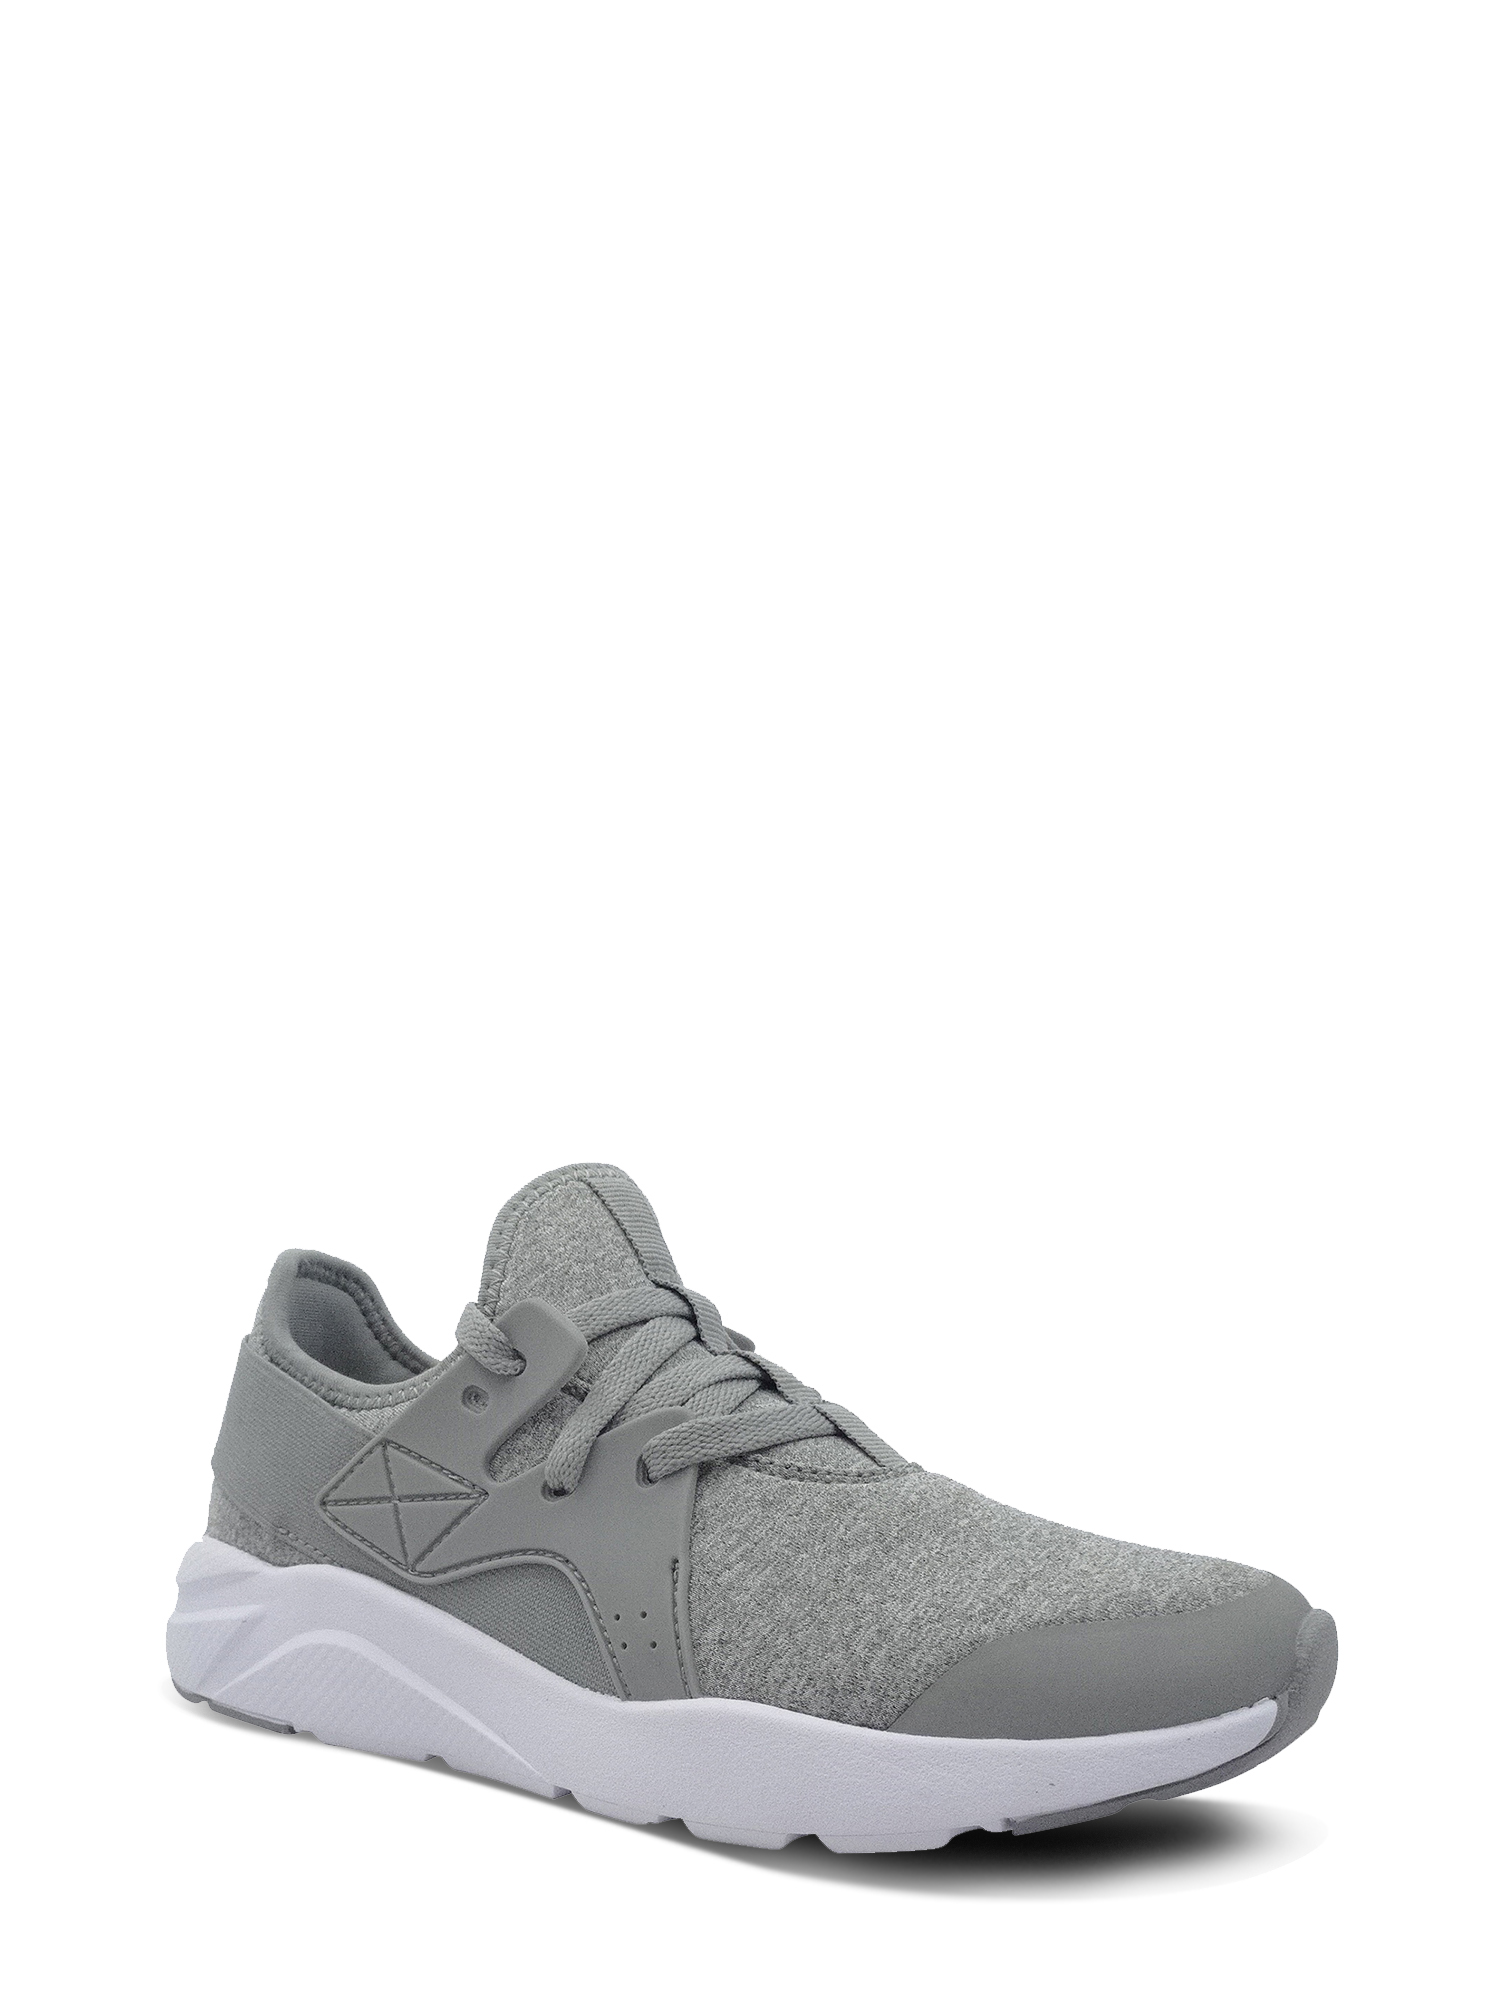 Women's Caged Mesh Athletic Shoe - image 1 of 5